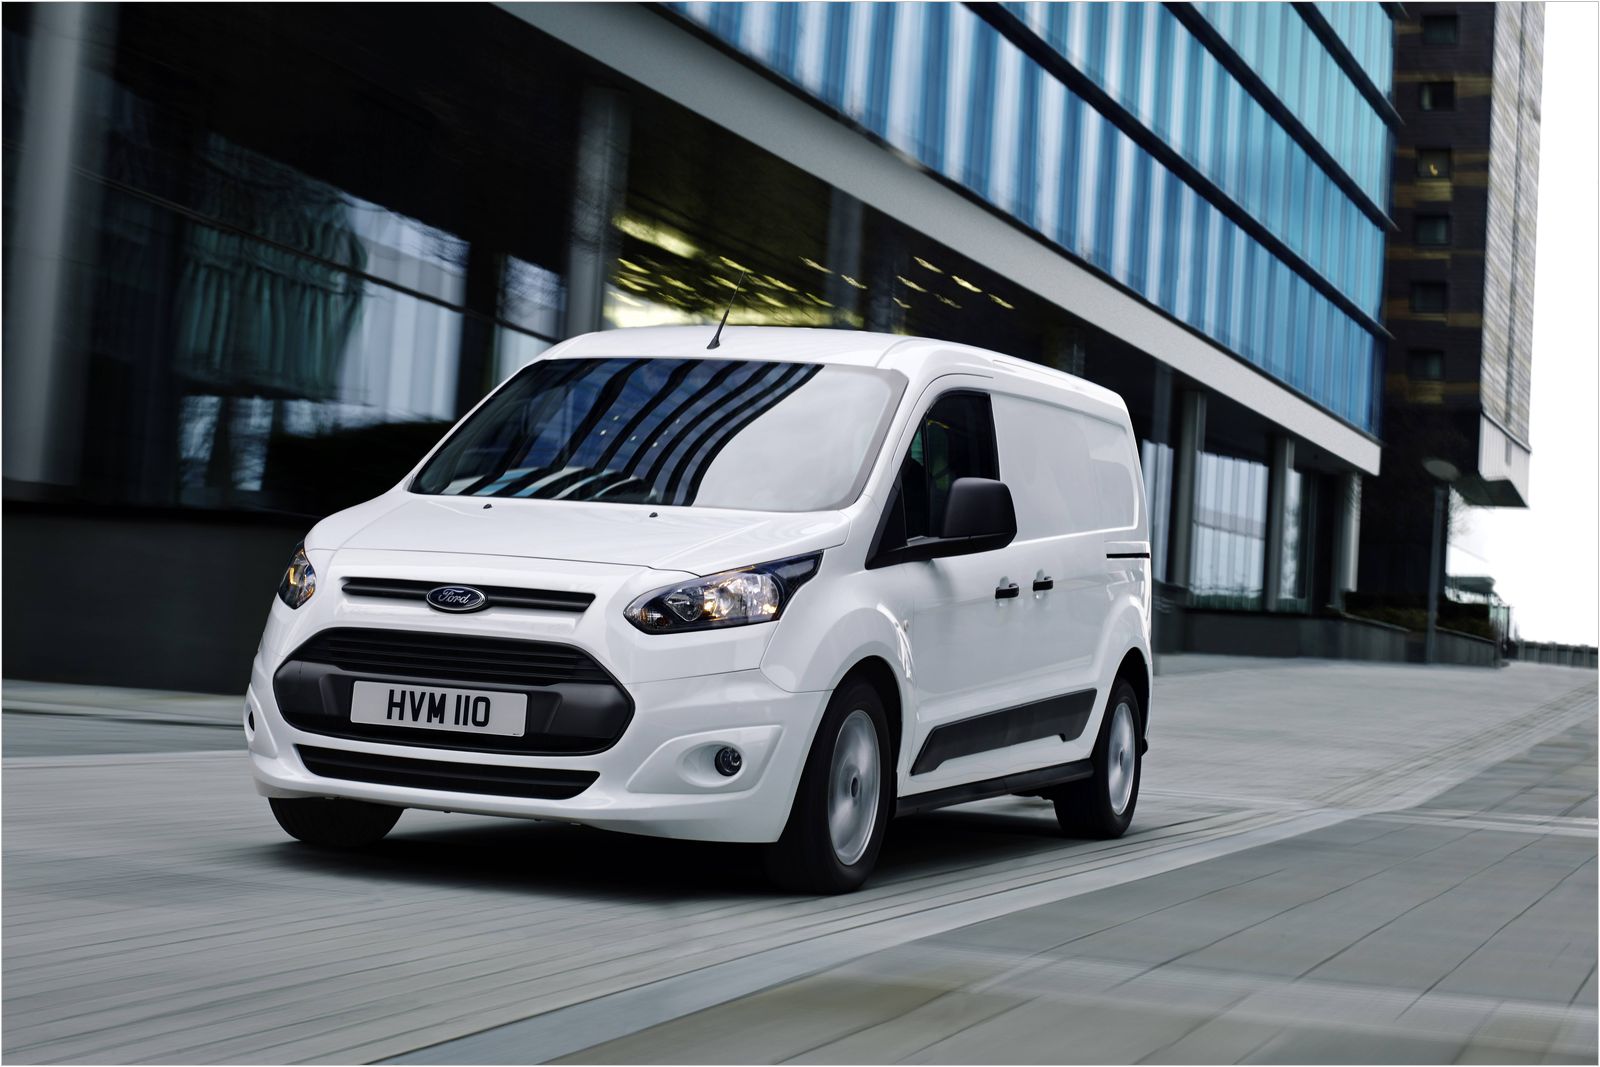 Ford Transit Connect, 1600x1067px, img-3